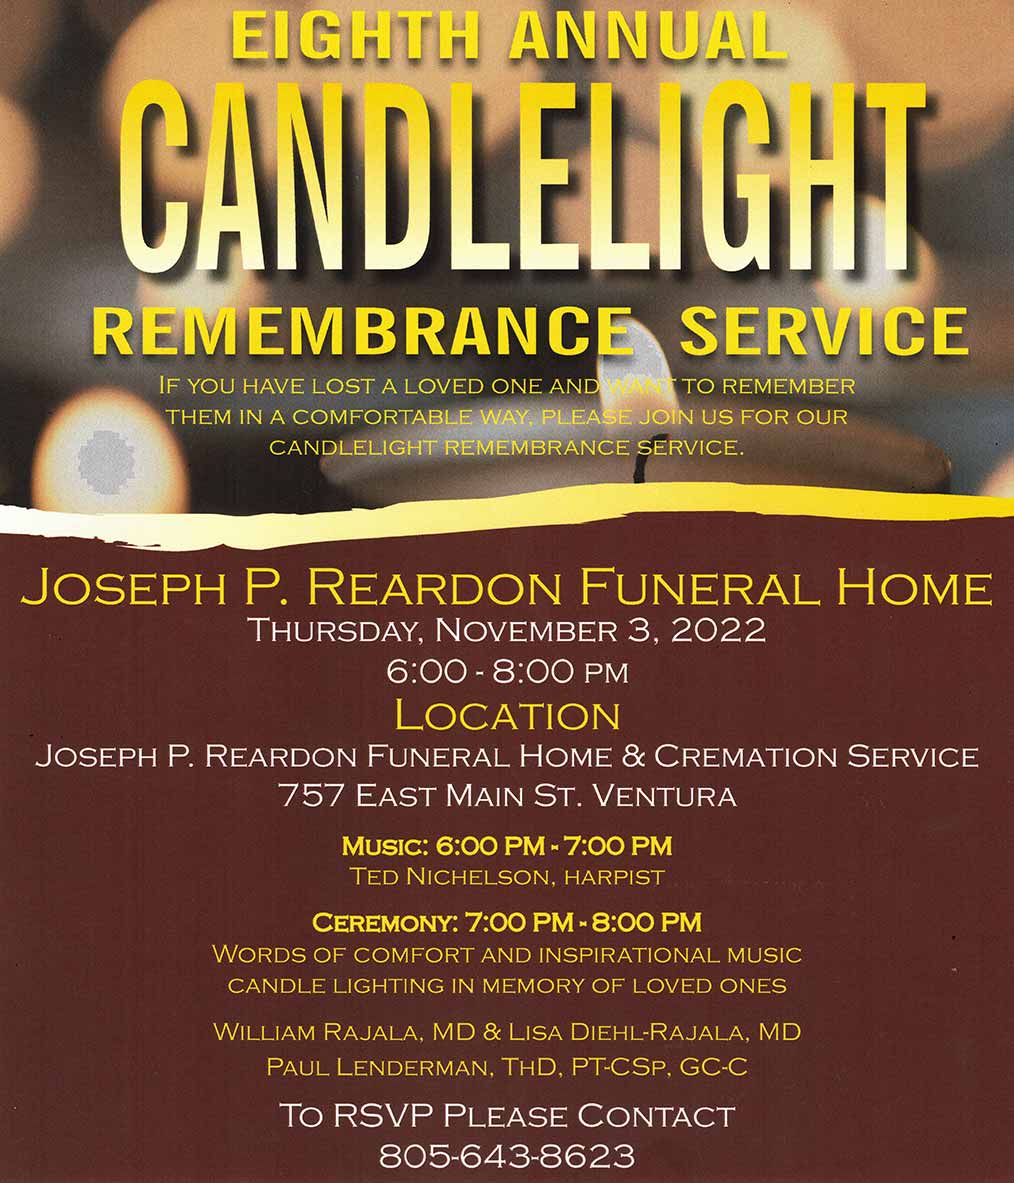 Eighth Annual Candlelight Remembrance Service - Joseph Reardon Funeral Home and Cremation